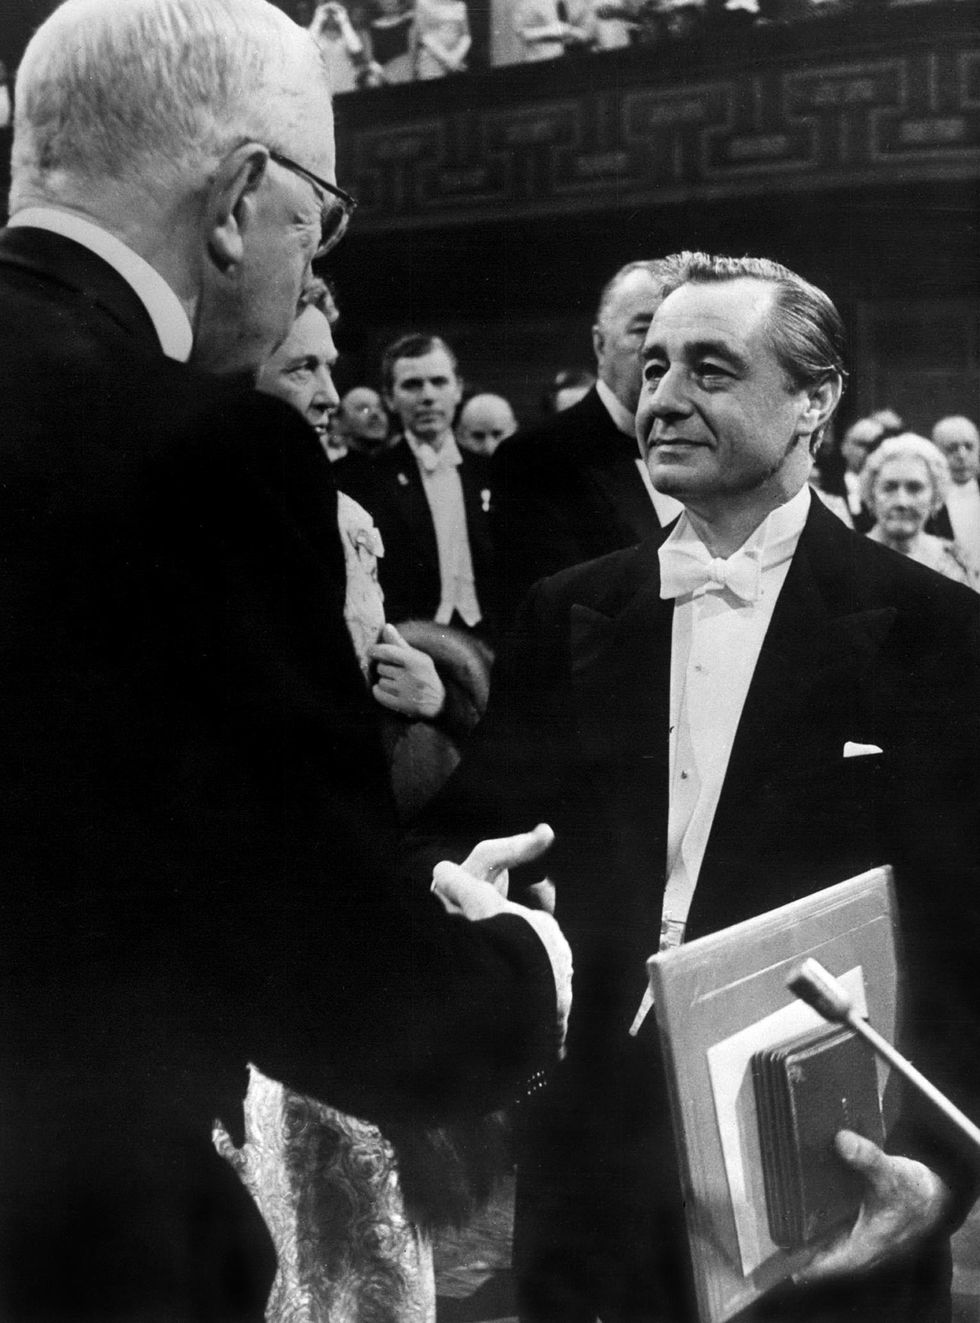 A middle-aged man in a tuxedo shakes hands with a white-haired man while a well-dressed crowd looks on.